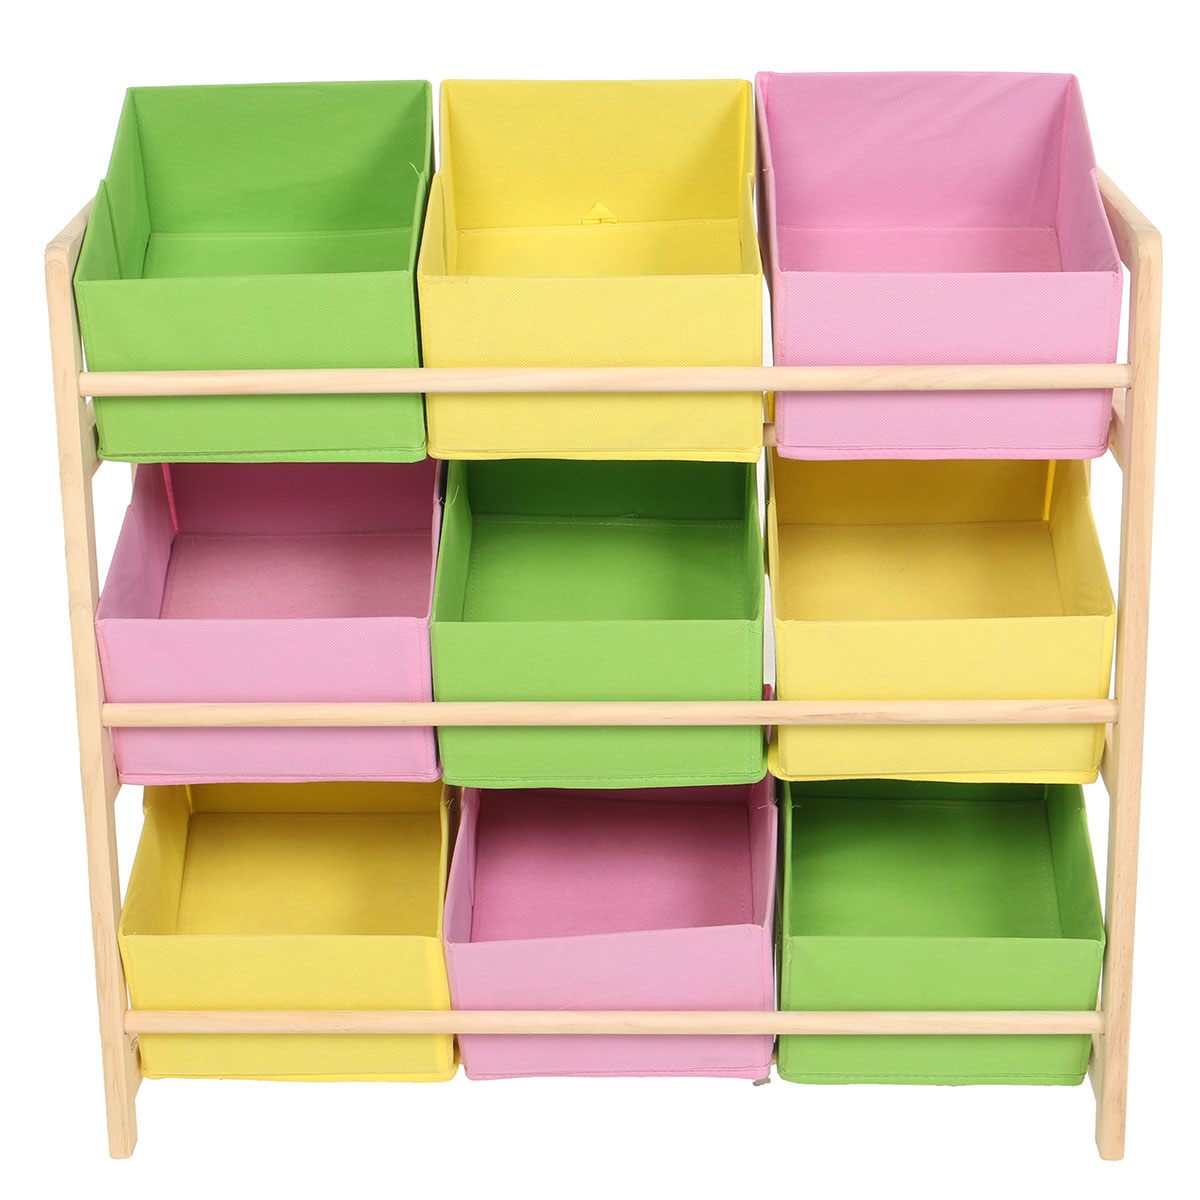 66309CM-Yellow-Pink-Green-Solid-Wood-Childrens-Toy-Rack-Storage-Rack-Toy-Rack-1754652-7